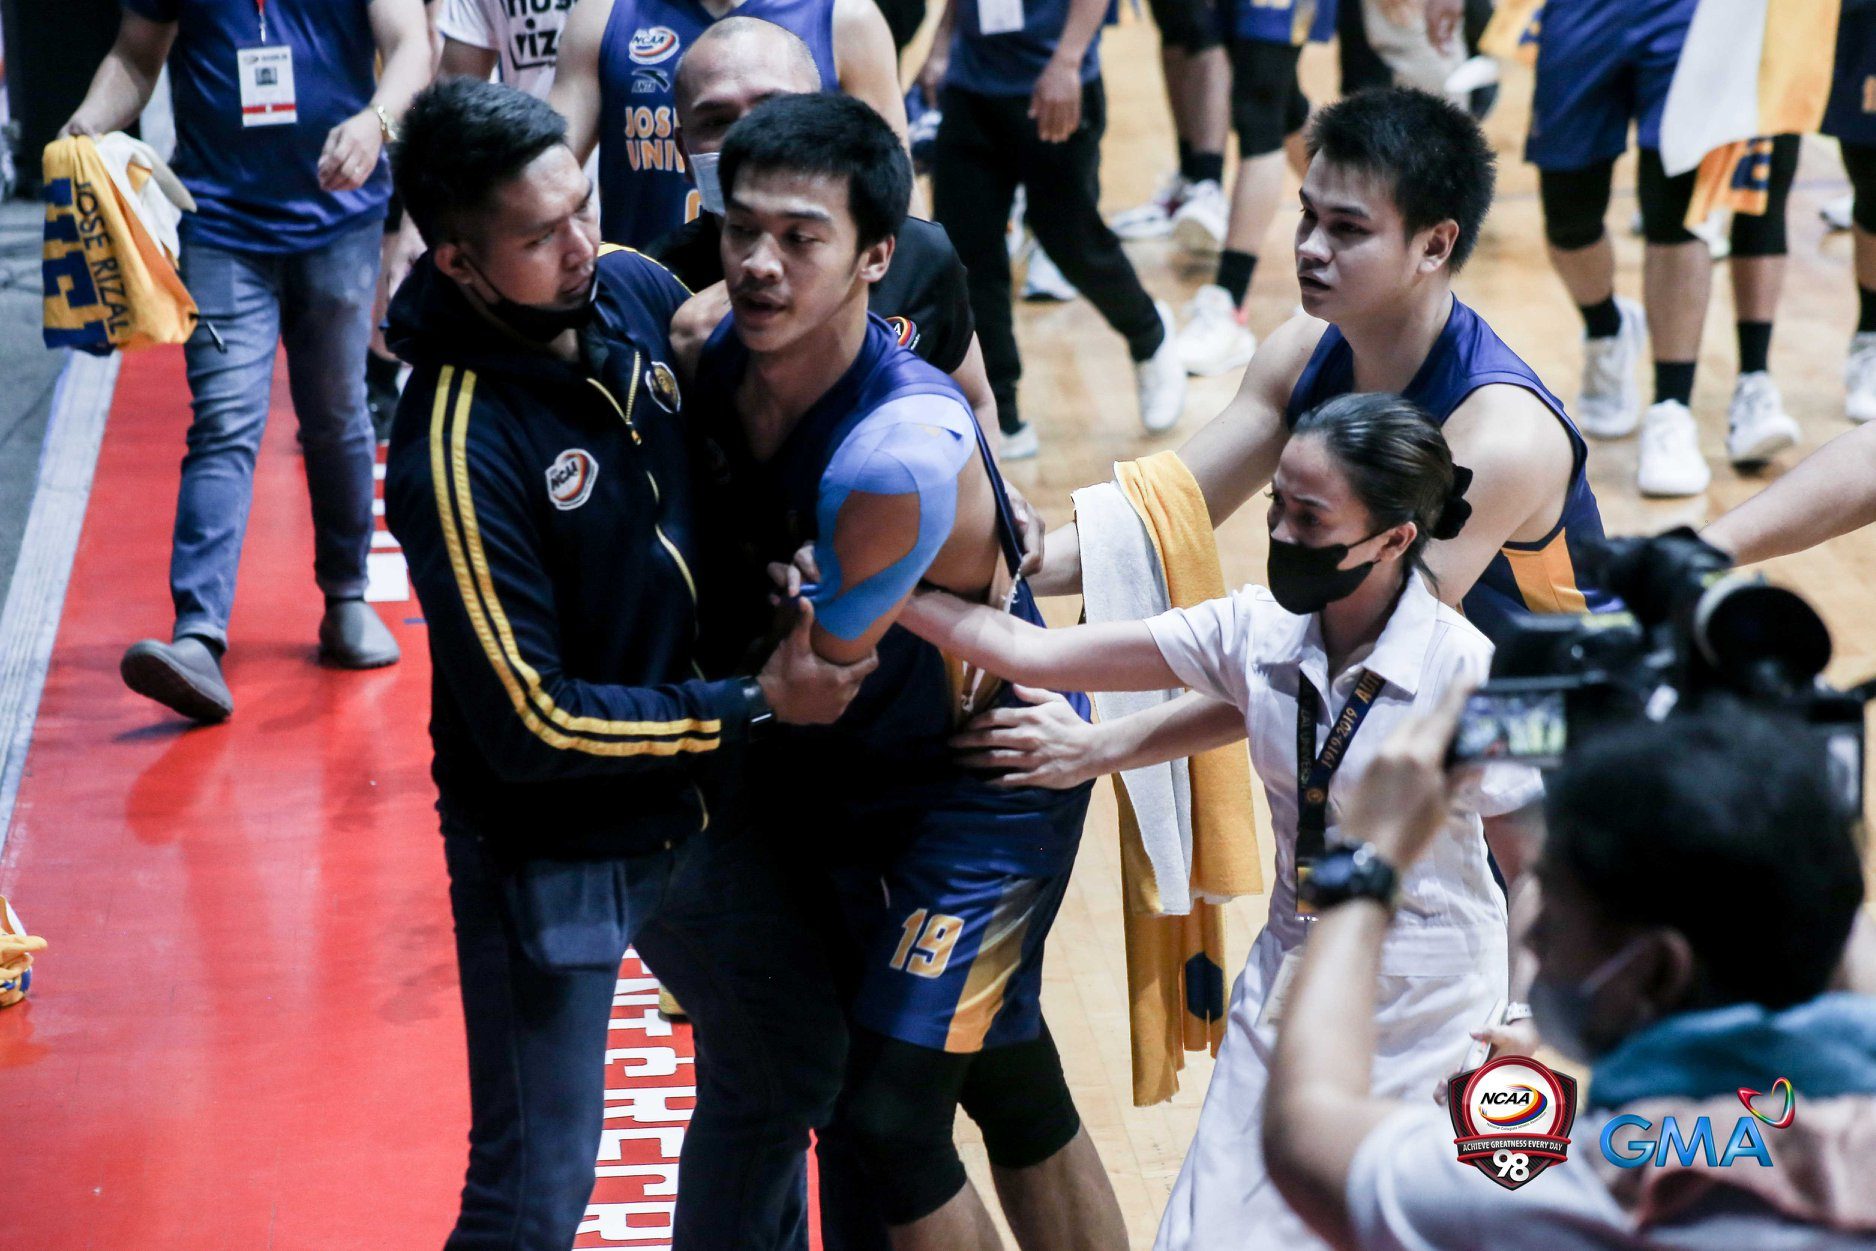 NCAA suspends referees in CSB-JRU brawl, beefs up security measures